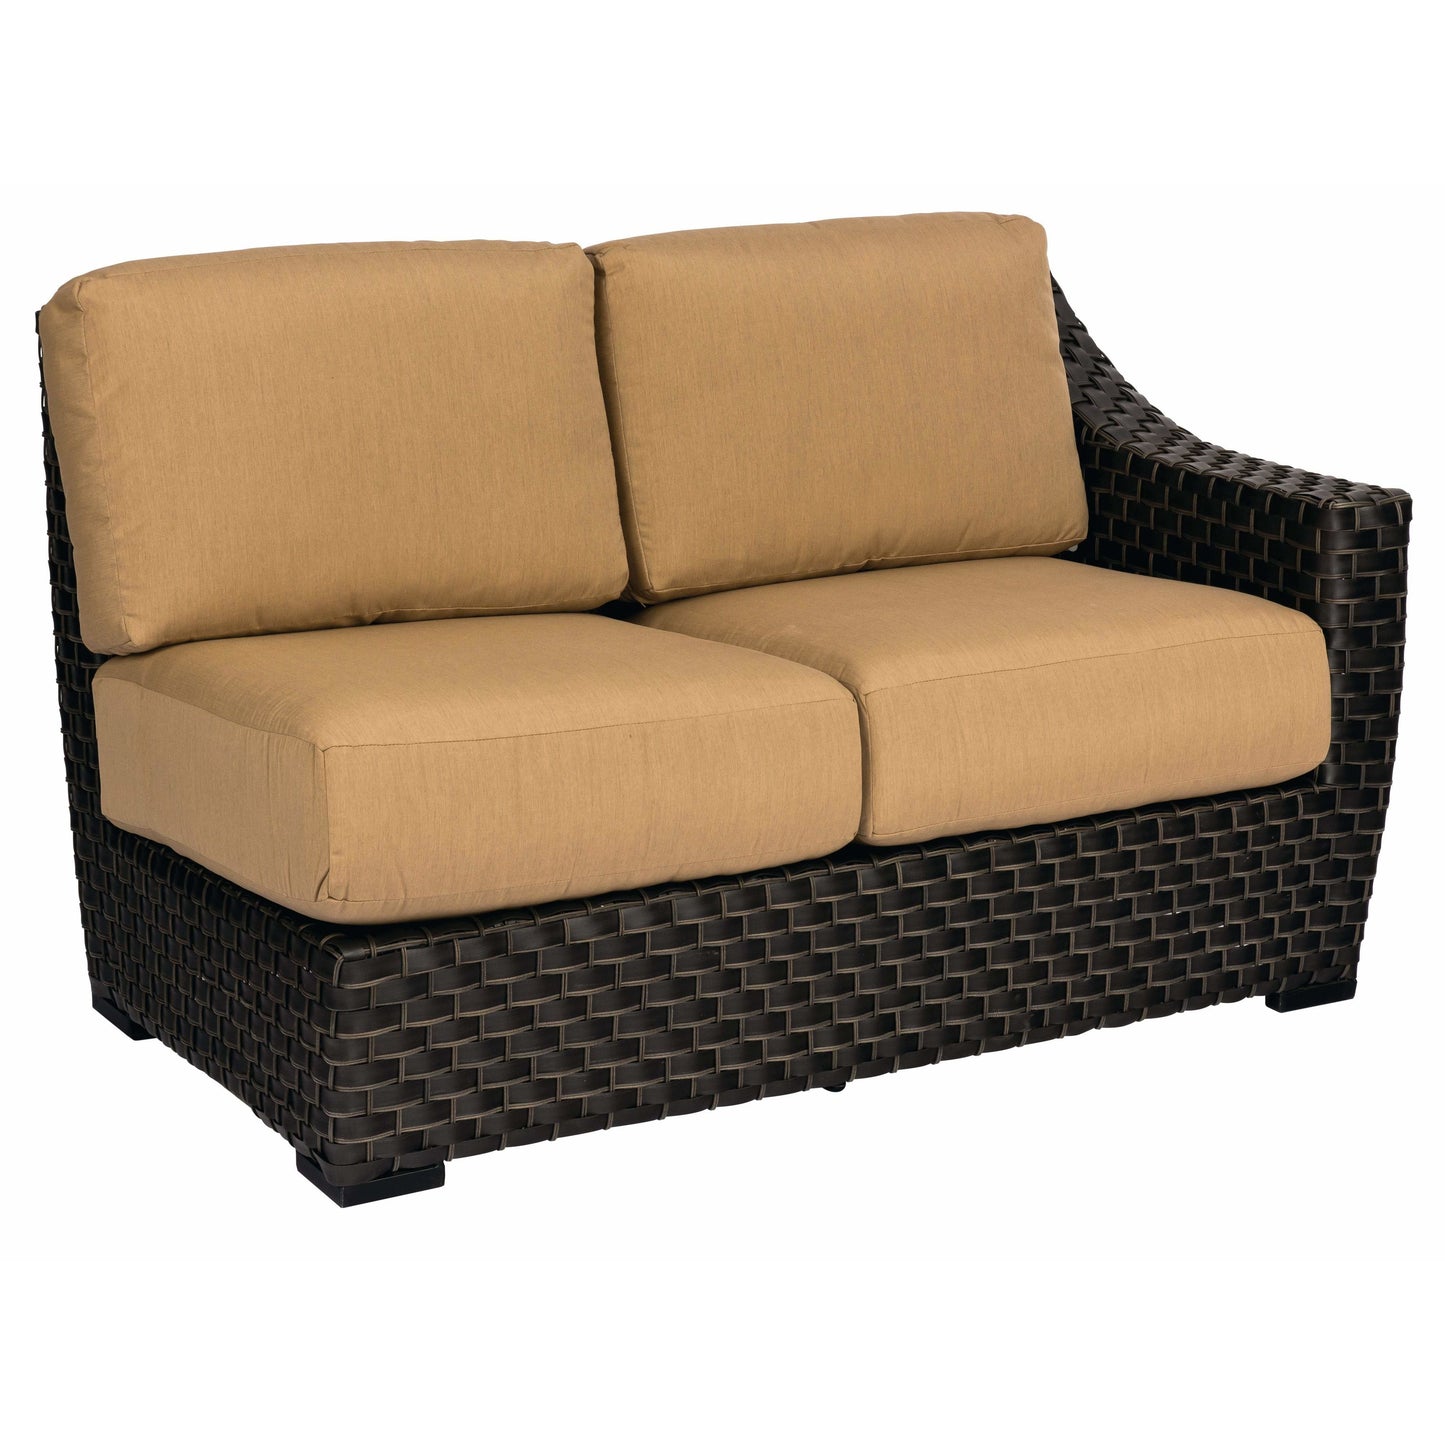 LAF Love Seat Sectional Unit S640031L Woodard Outdoor Patio | Cooper Collection Seating Woodard 